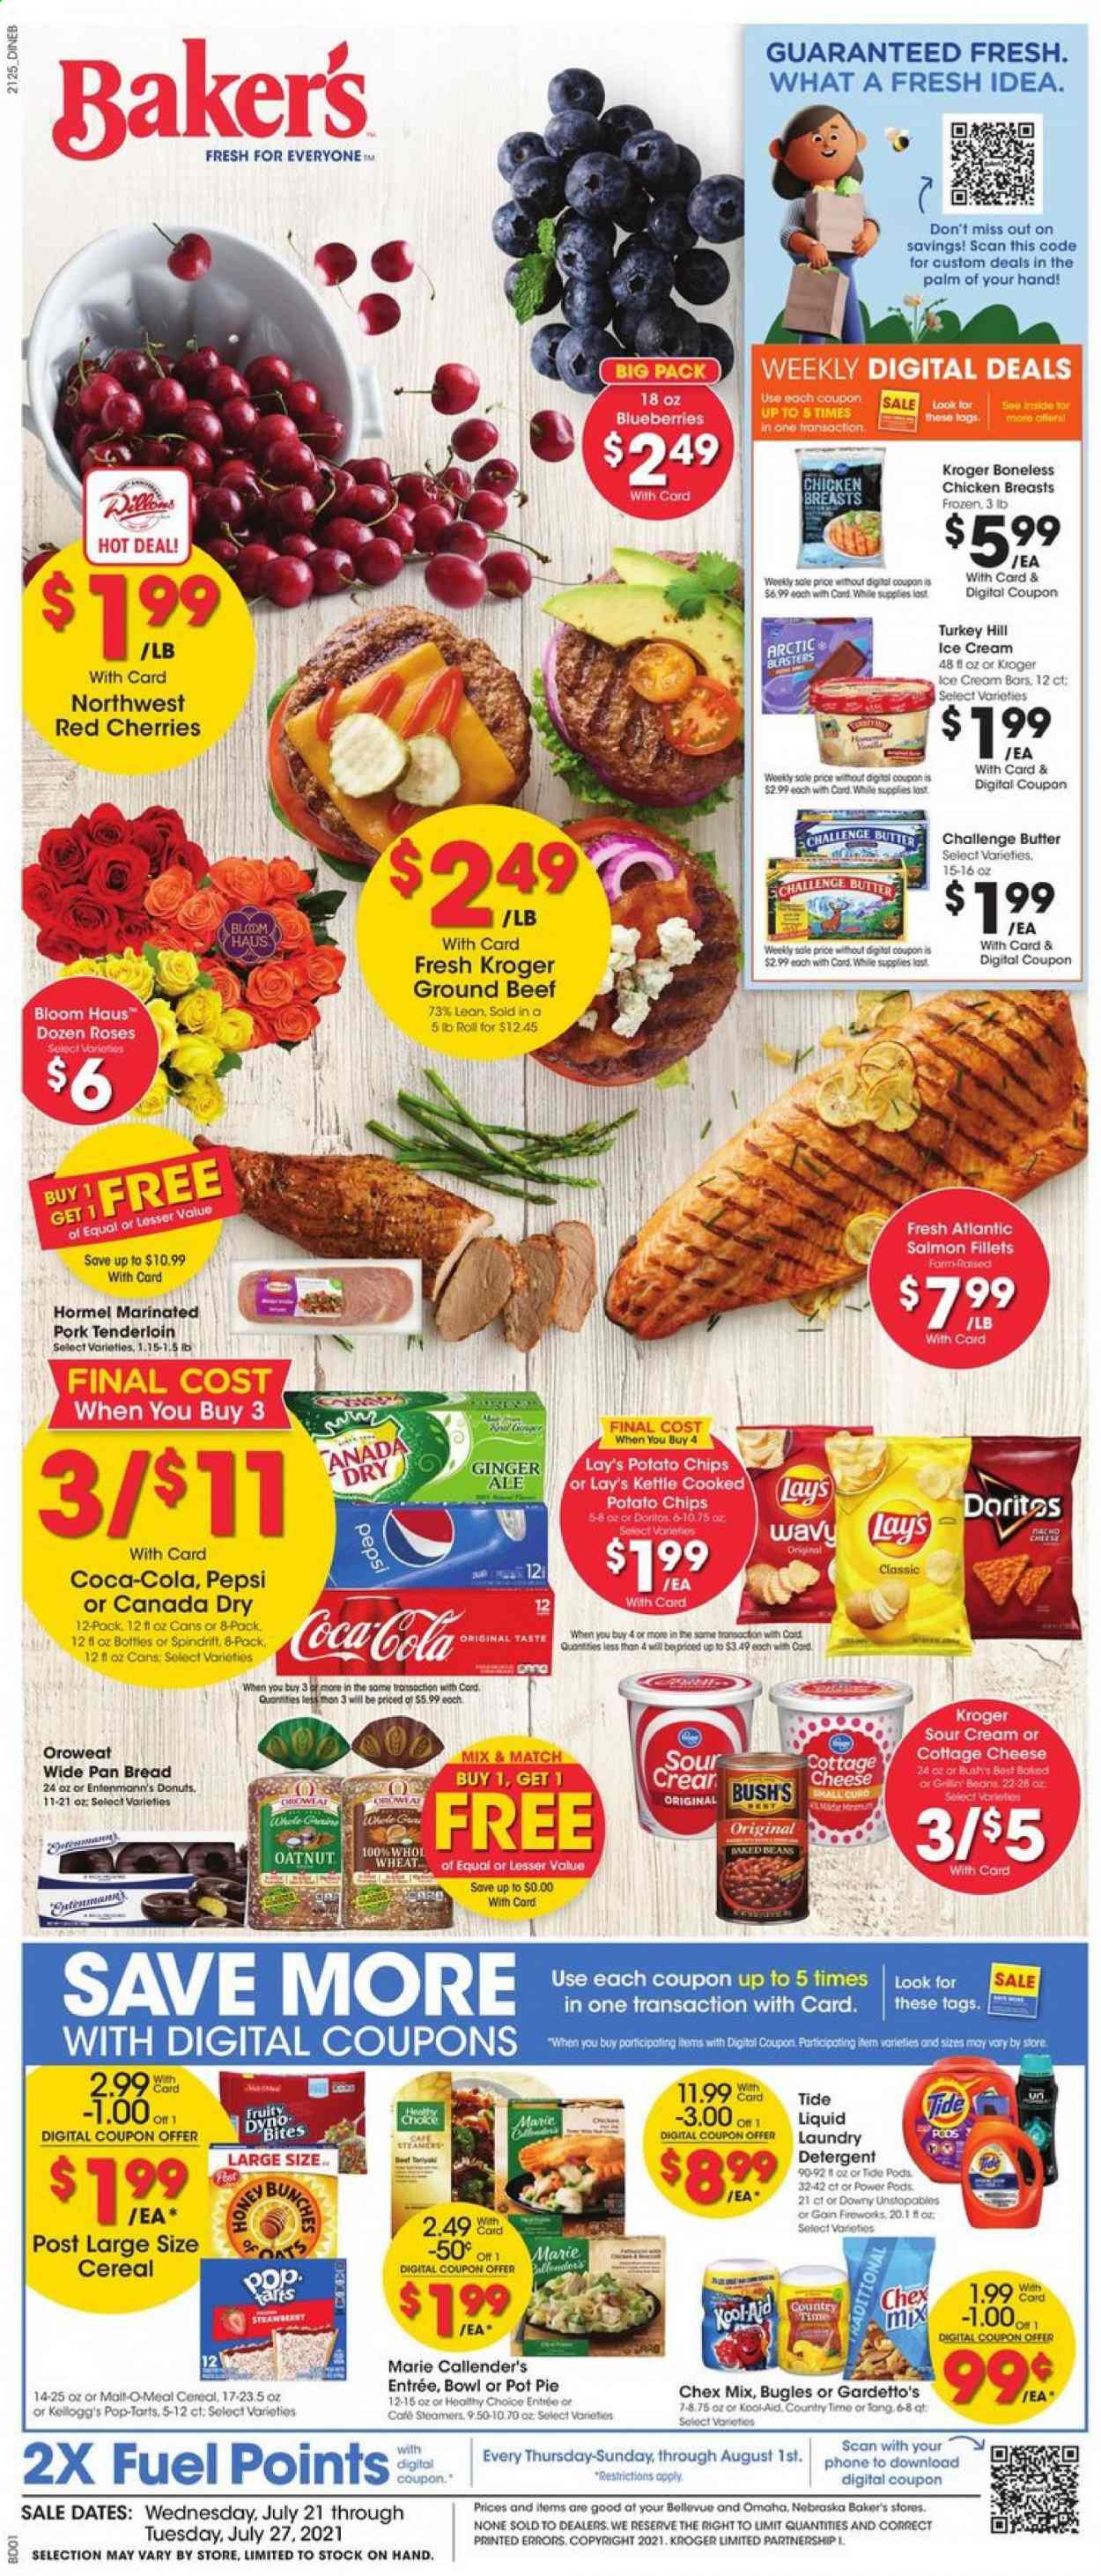 thumbnail - Baker's Flyer - 07/21/2021 - 07/27/2021 - Sales products - bread, pie, pot pie, donut, beans, blueberries, cherries, salmon, salmon fillet, Marie Callender's, Hormel, cottage cheese, curd, butter, sour cream, ice cream, Kellogg's, potato chips, Lay’s, Chex Mix, oats, baked beans, cereals, Canada Dry, Coca-Cola, ginger ale, Pepsi, Country Time, Spindrift, chicken breasts, beef meat, ground beef, pork meat, pork tenderloin, detergent, Gain, Tide, Unstopables, Gain Fireworks, pot, pan, bowl, Bakers, tong, rose. Page 1.